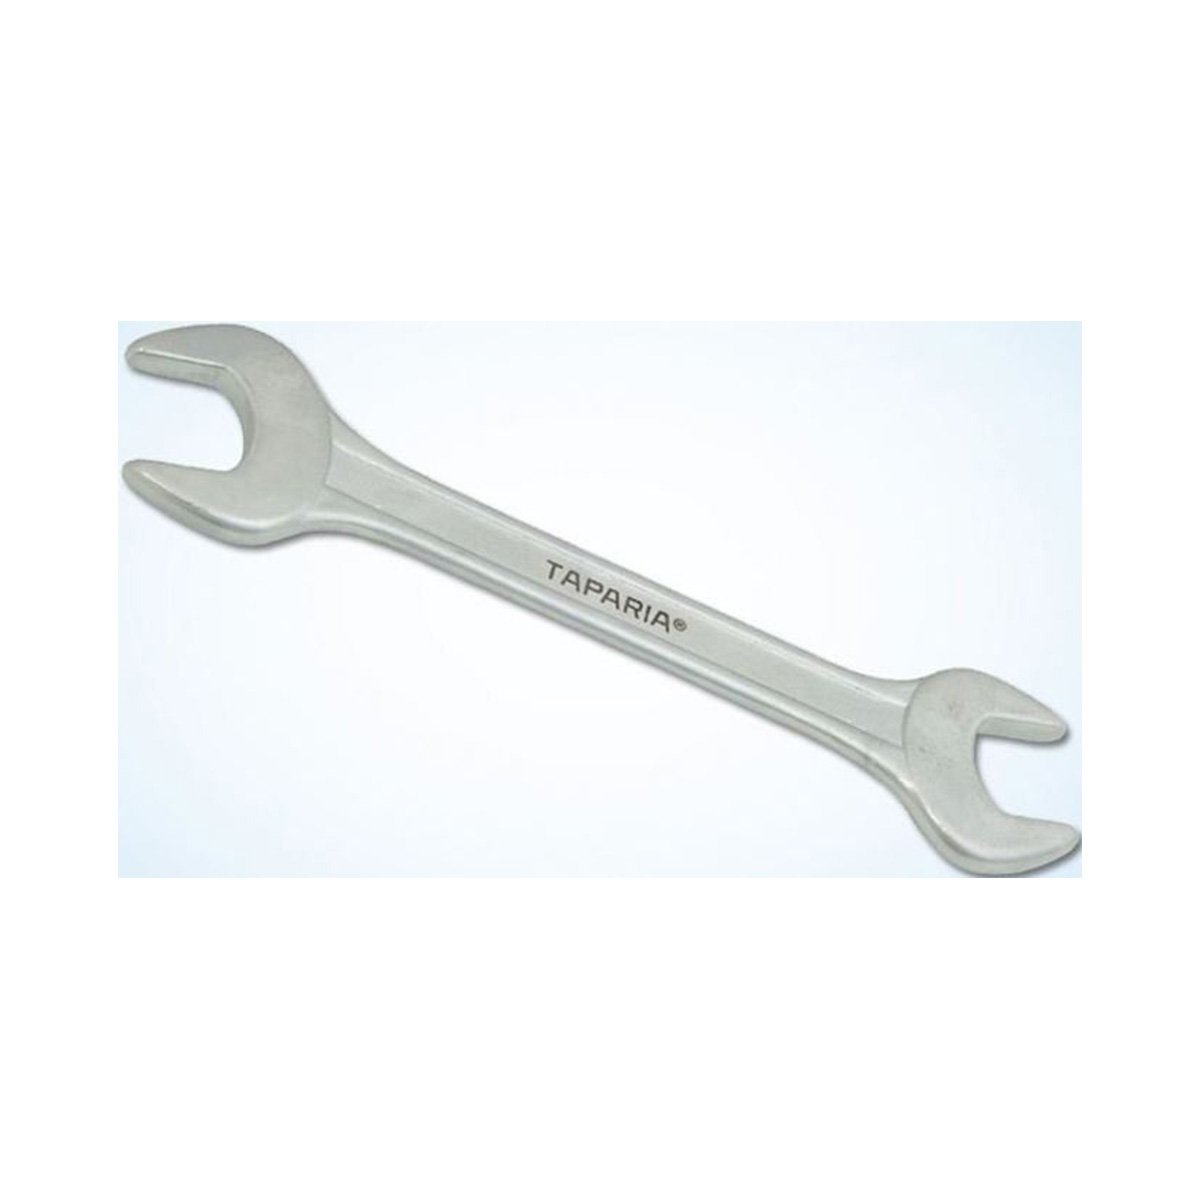 Buy Taparia 1808 6x7mm to 20x22 mm 8pc Ring Spanner Set on IBO.com & Store  @ Best Price. Genuine Products | Quick Delivery | Pay on Delivery